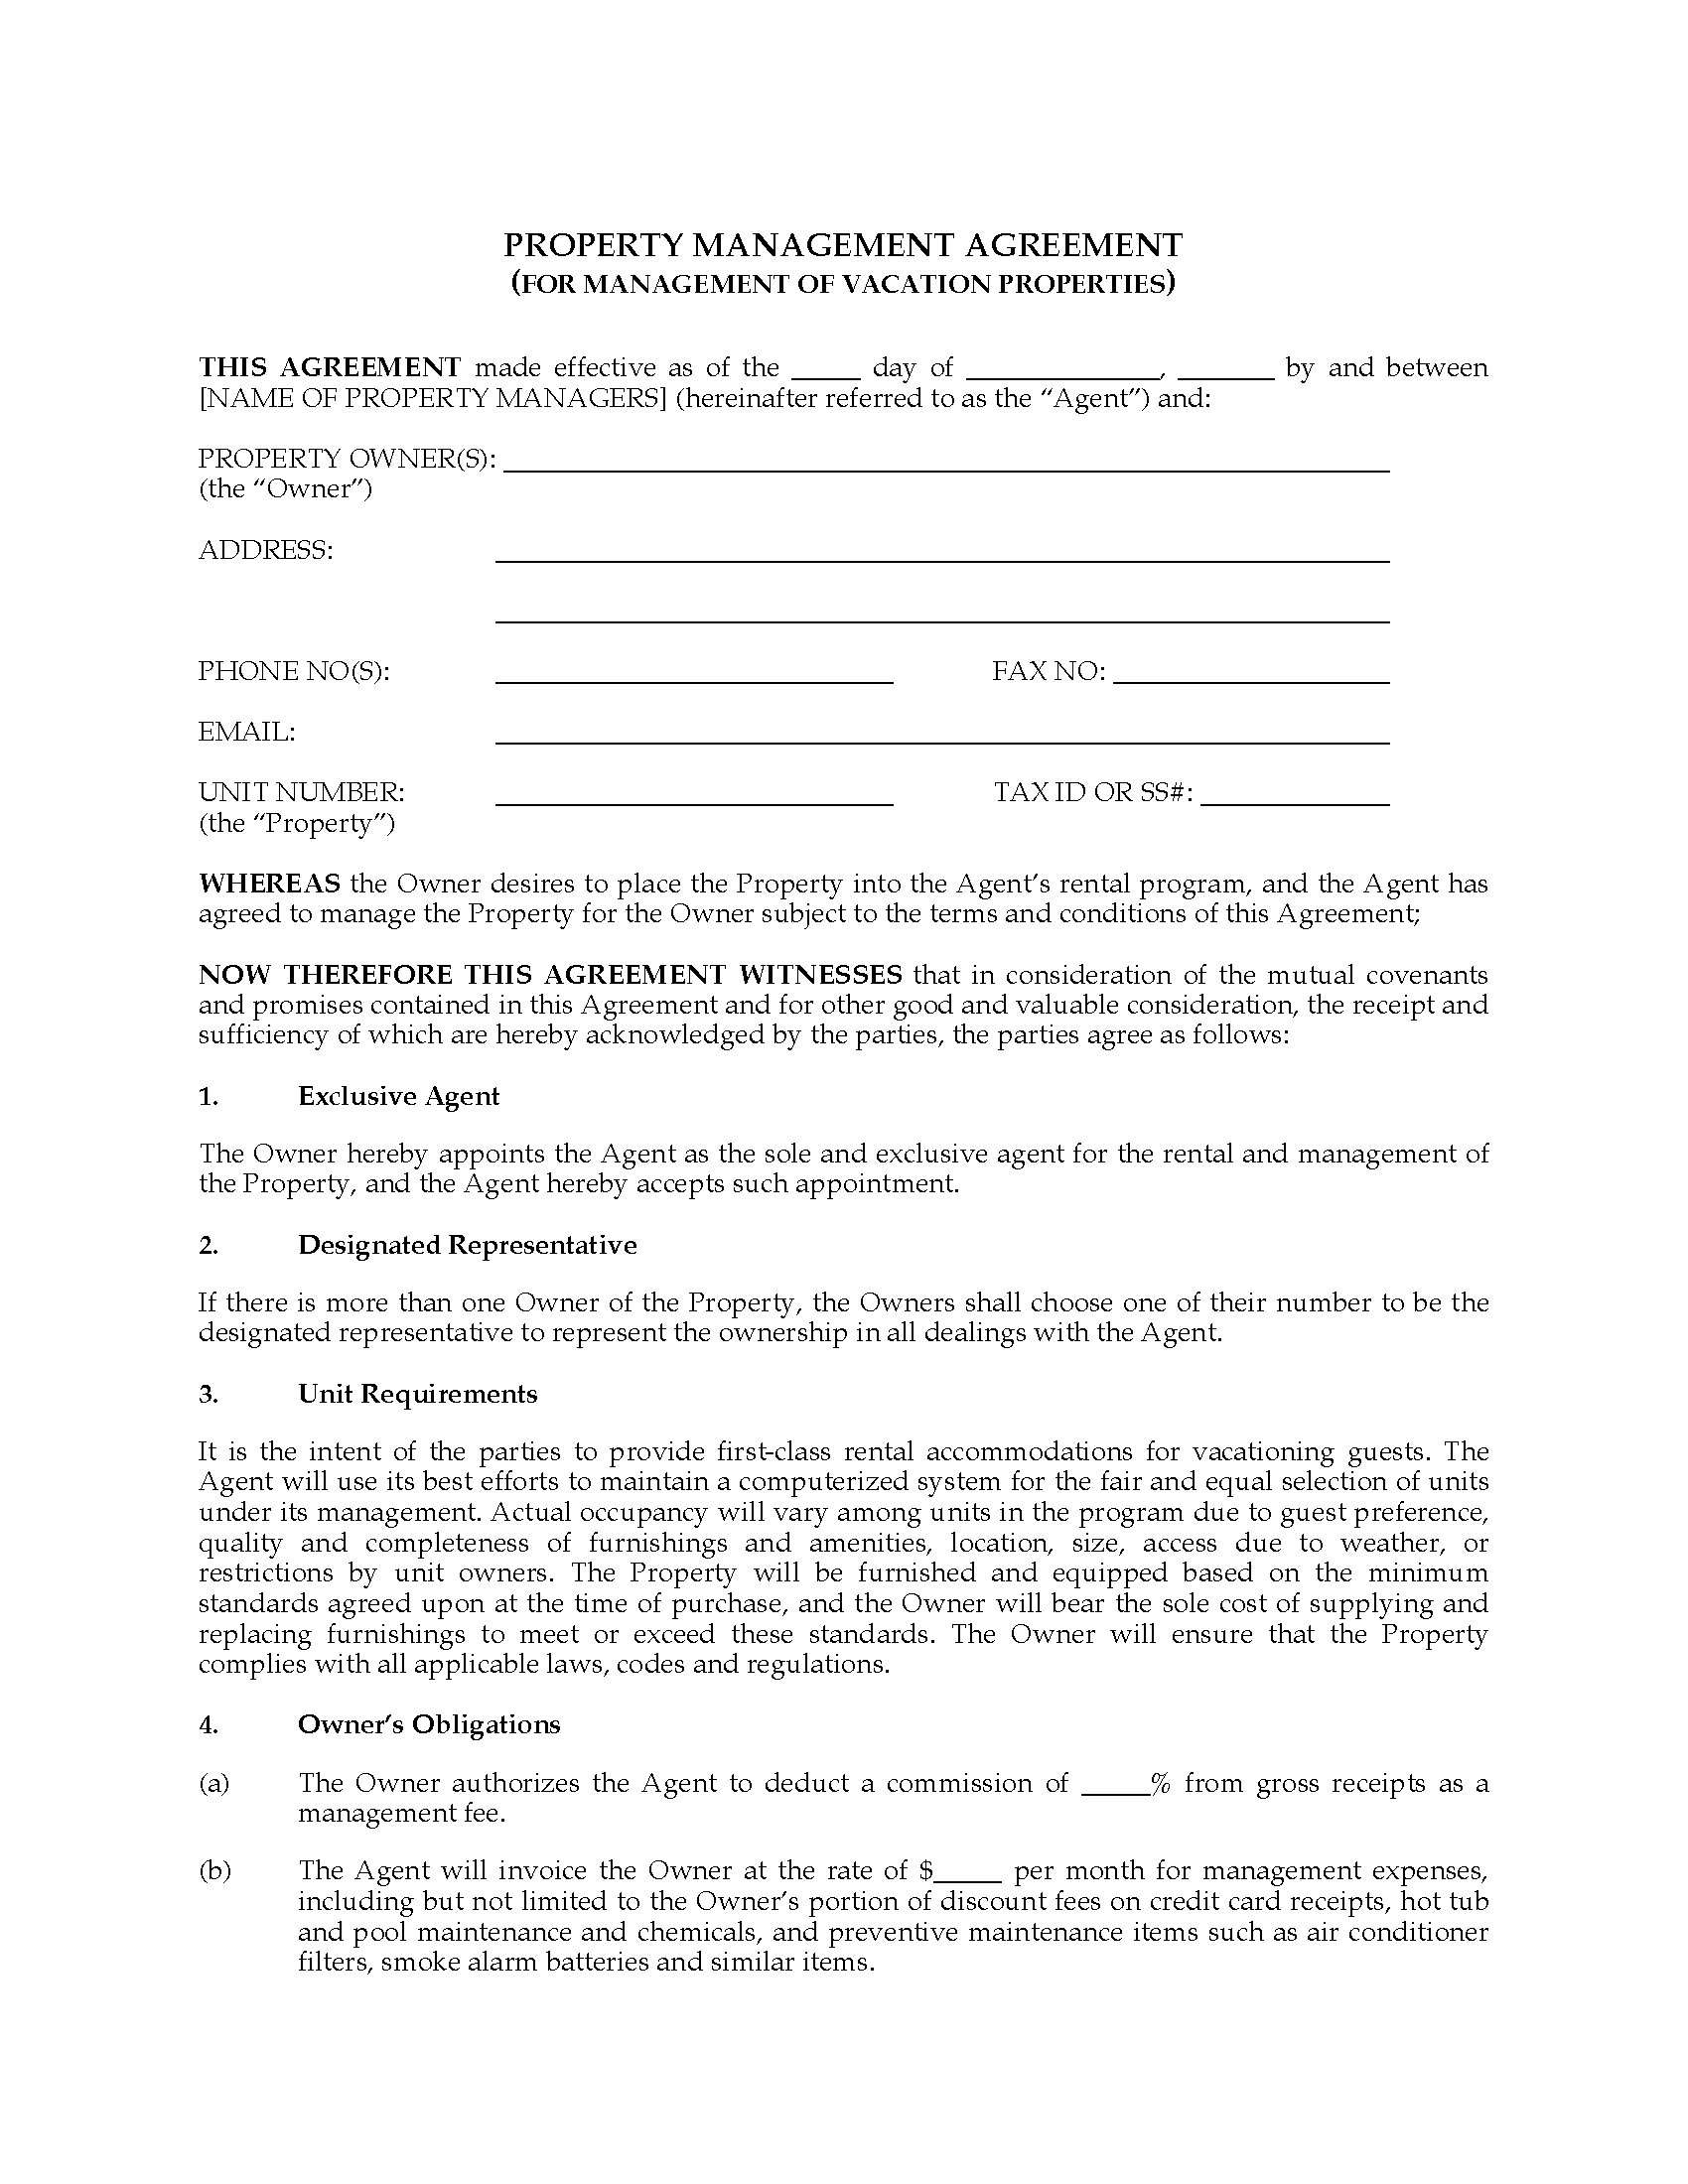 Property Management Agreement for Vacation Properties ...